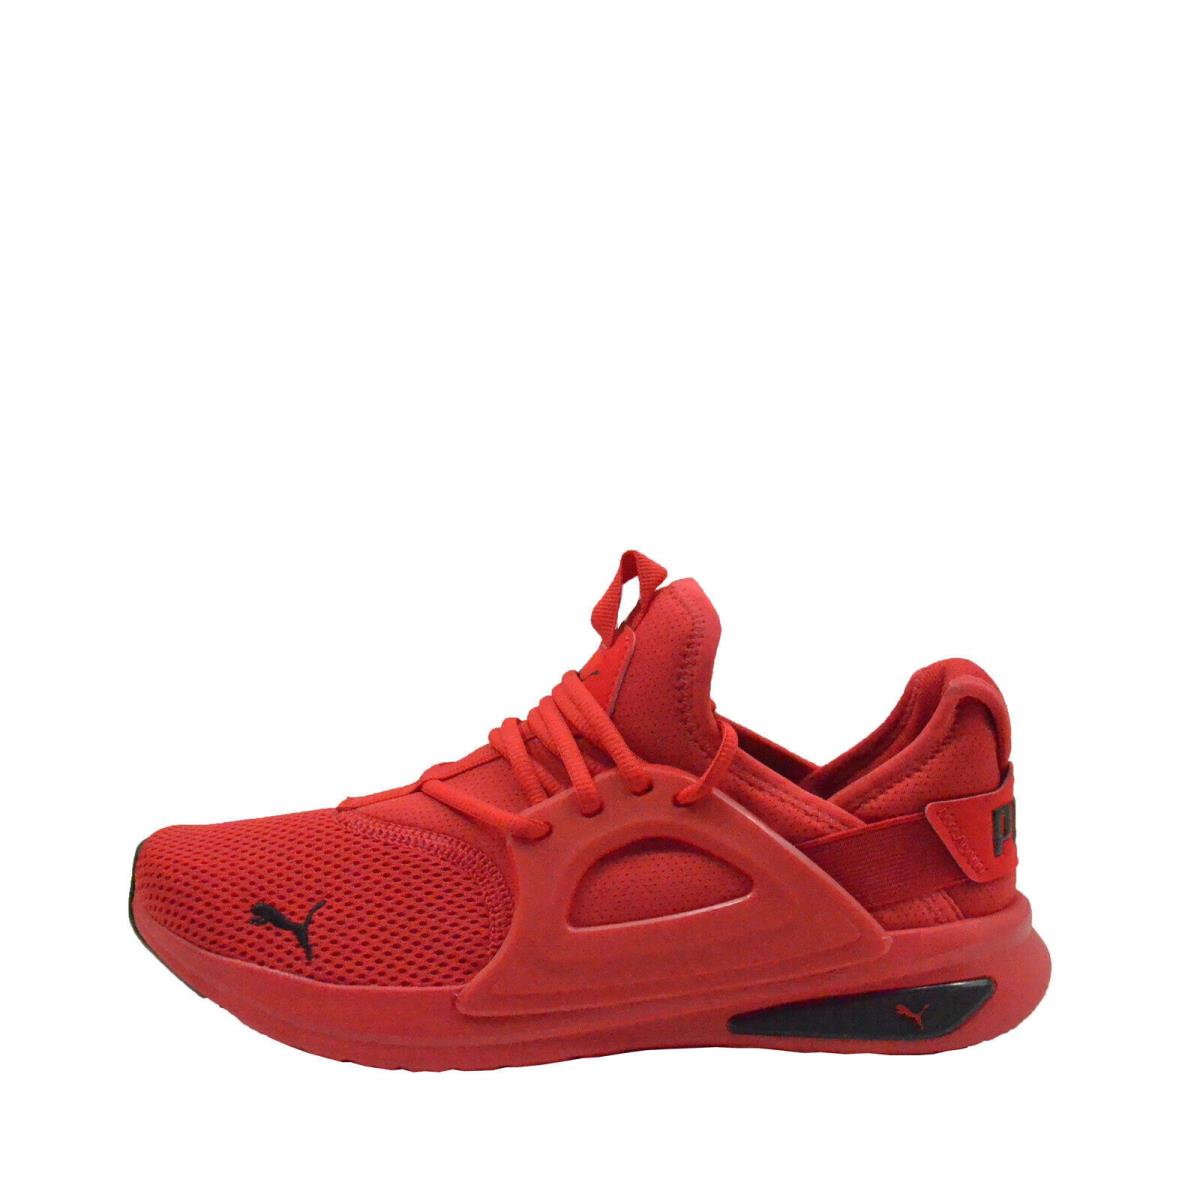 Puma Softride Enzo Evo High Risk Red Men`s Run Athletic Sneakers 37704802 - High Risk Red